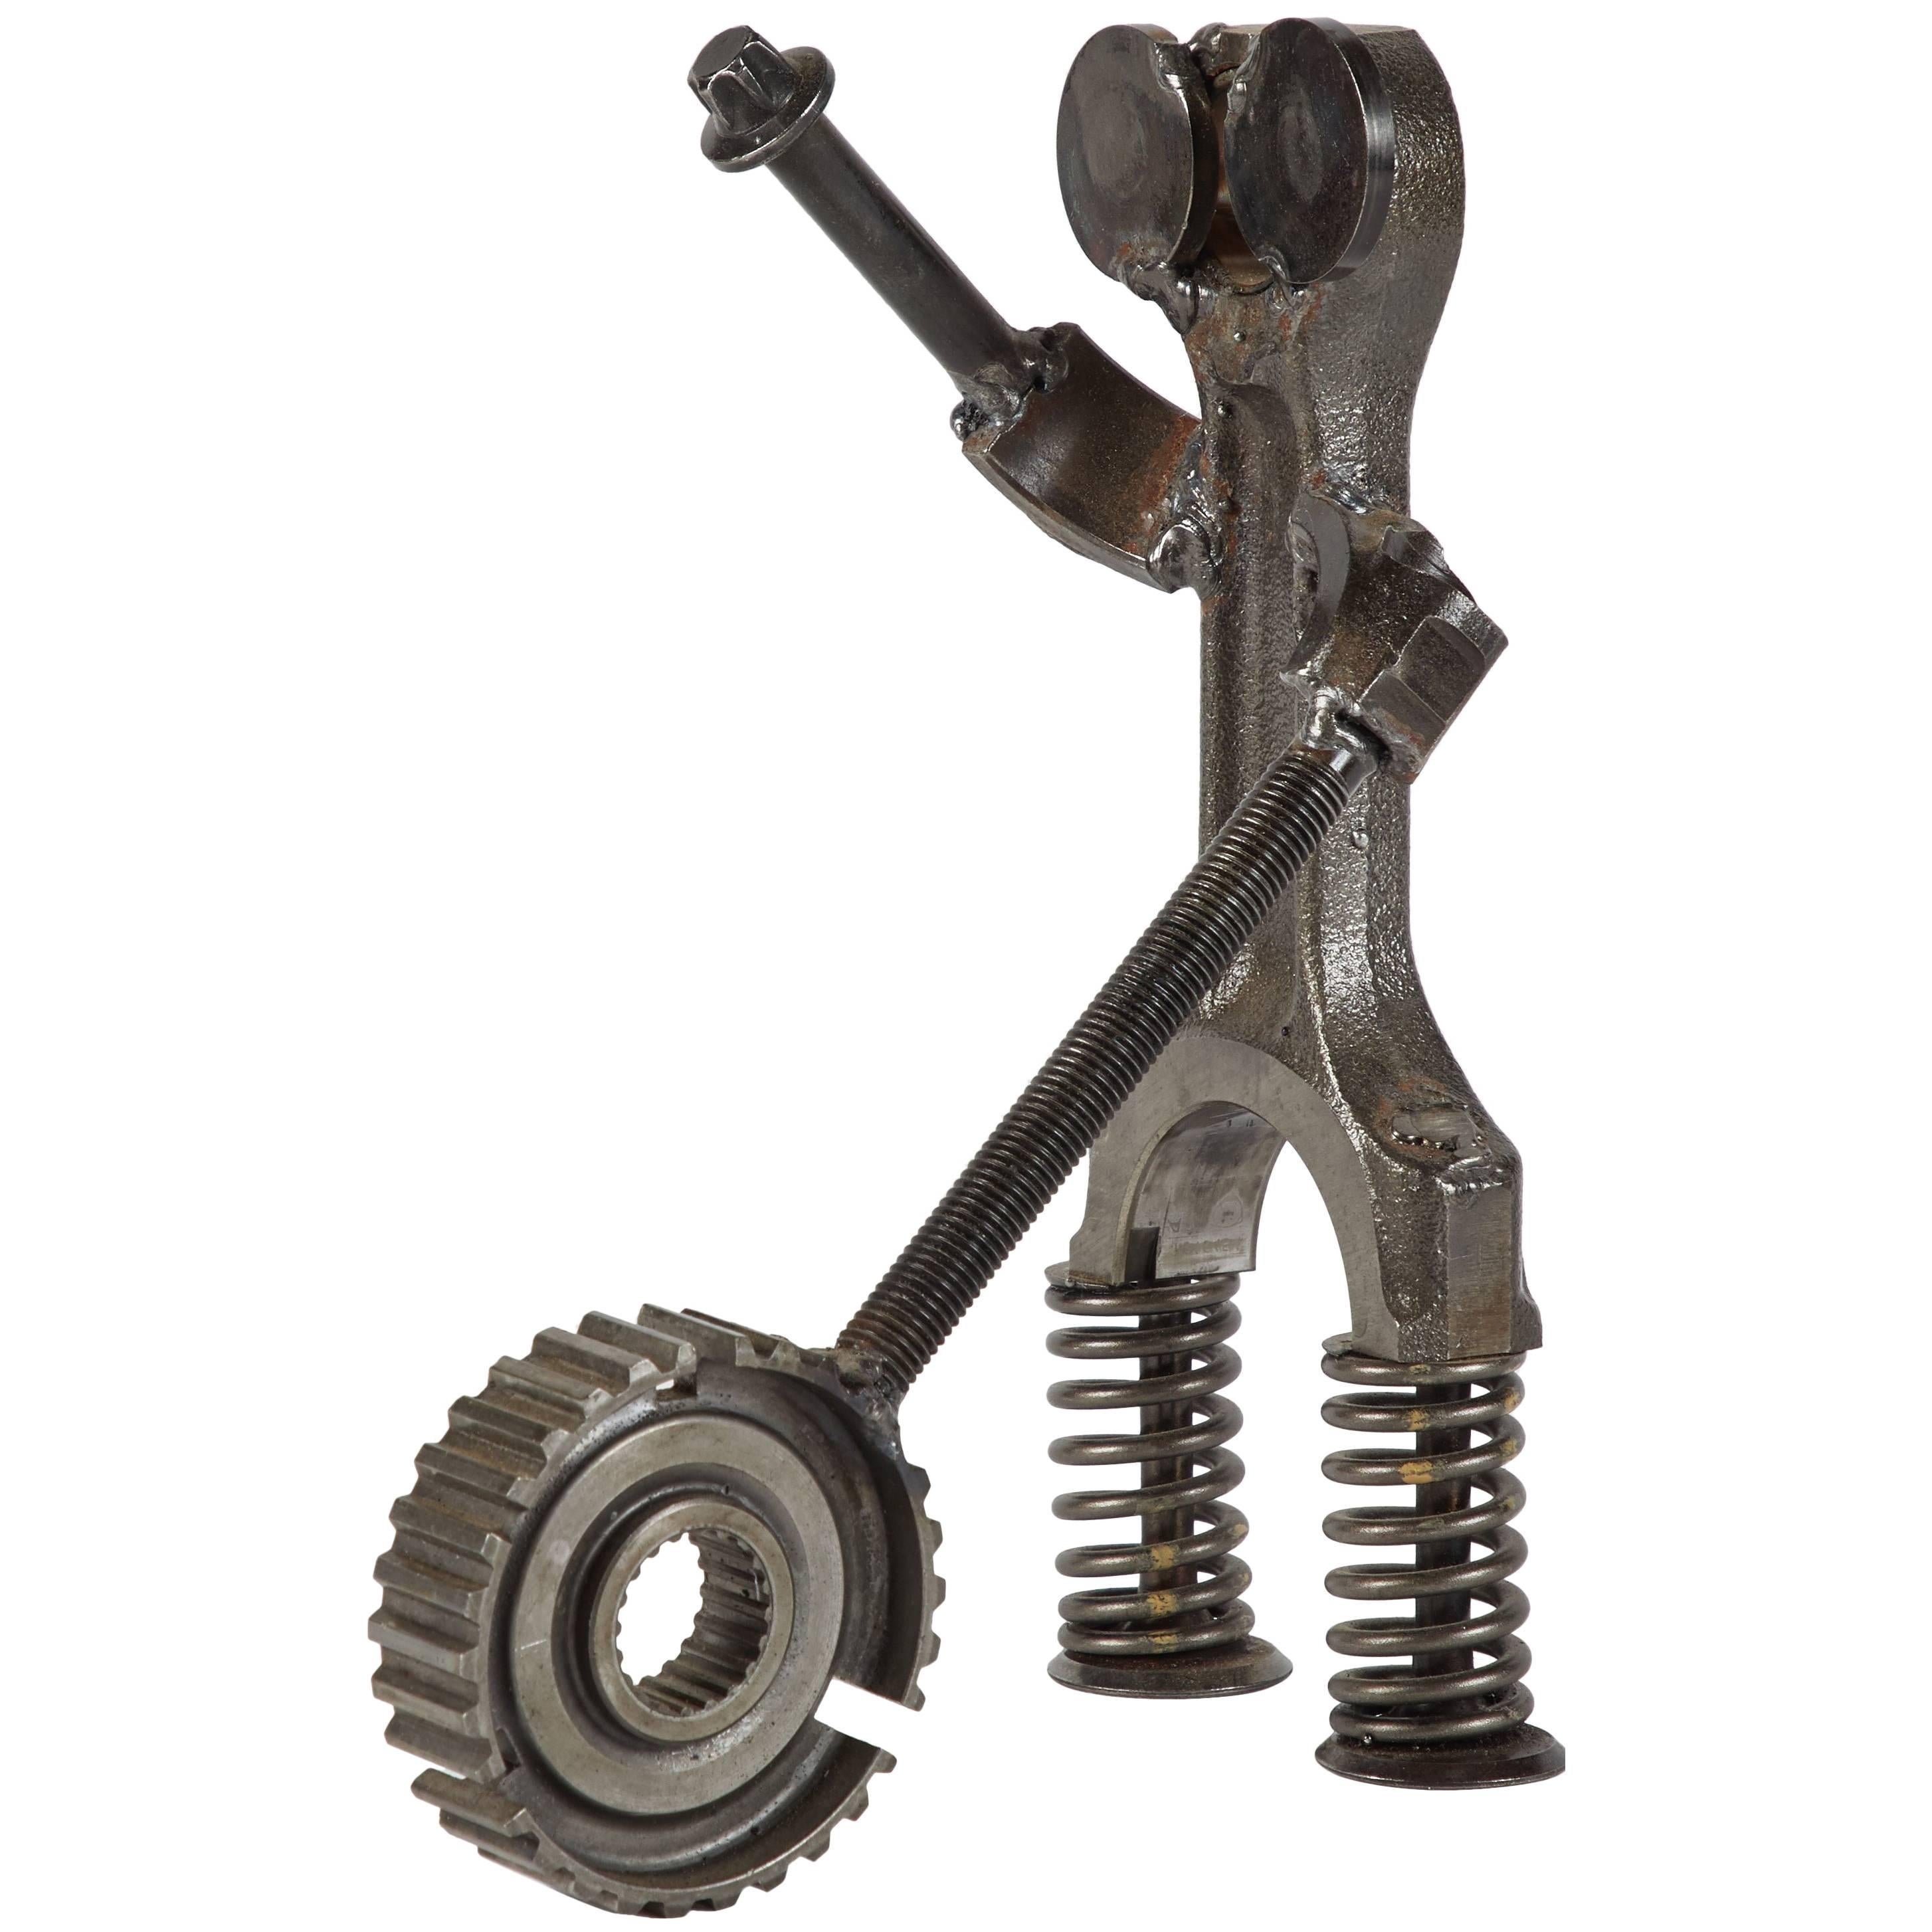 Sculpture Made from Industrial Iron Parts in France Circa 1980s